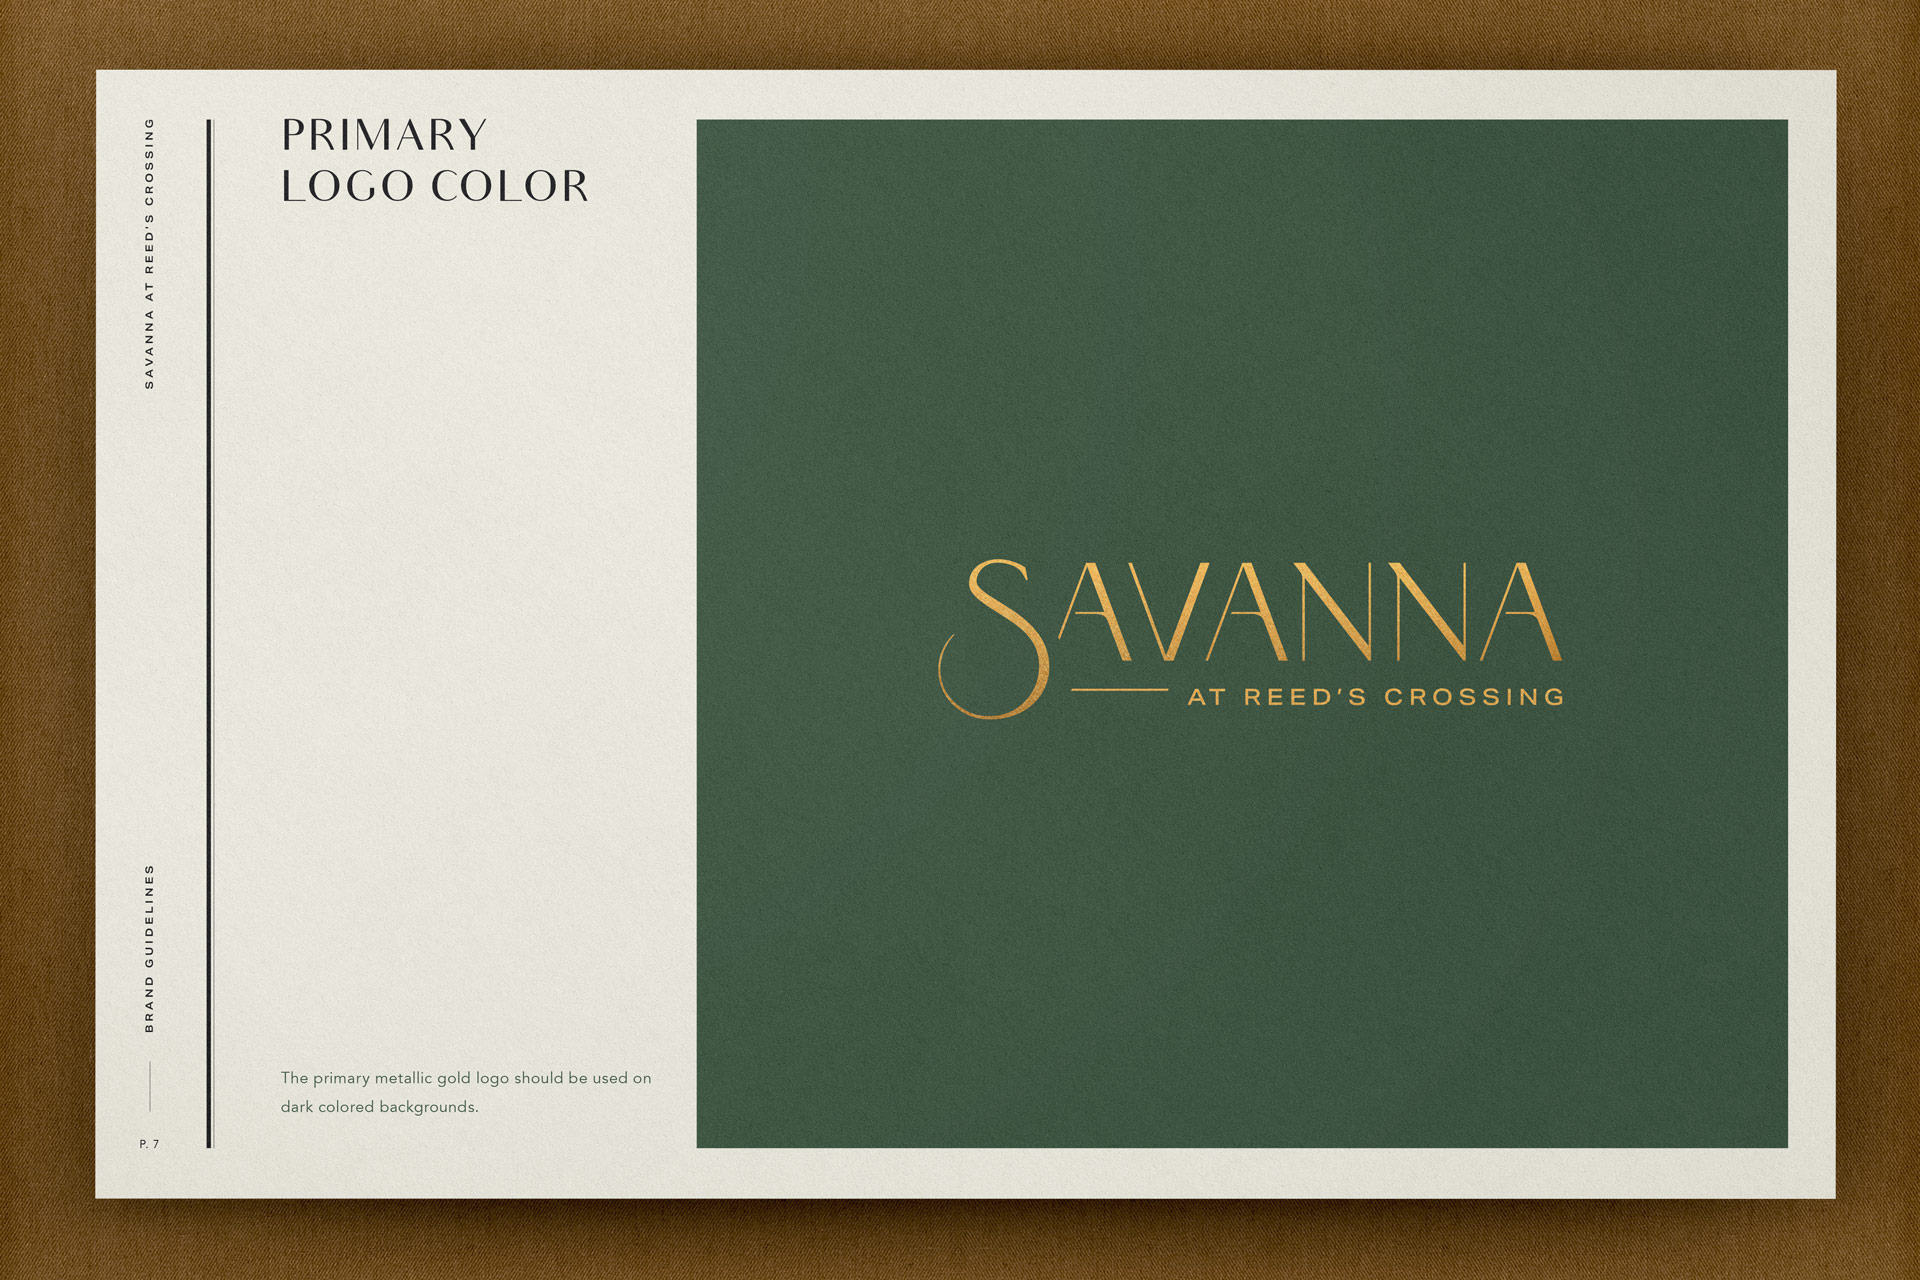 Savanna at Reed's Crossing main logo page of the brand book